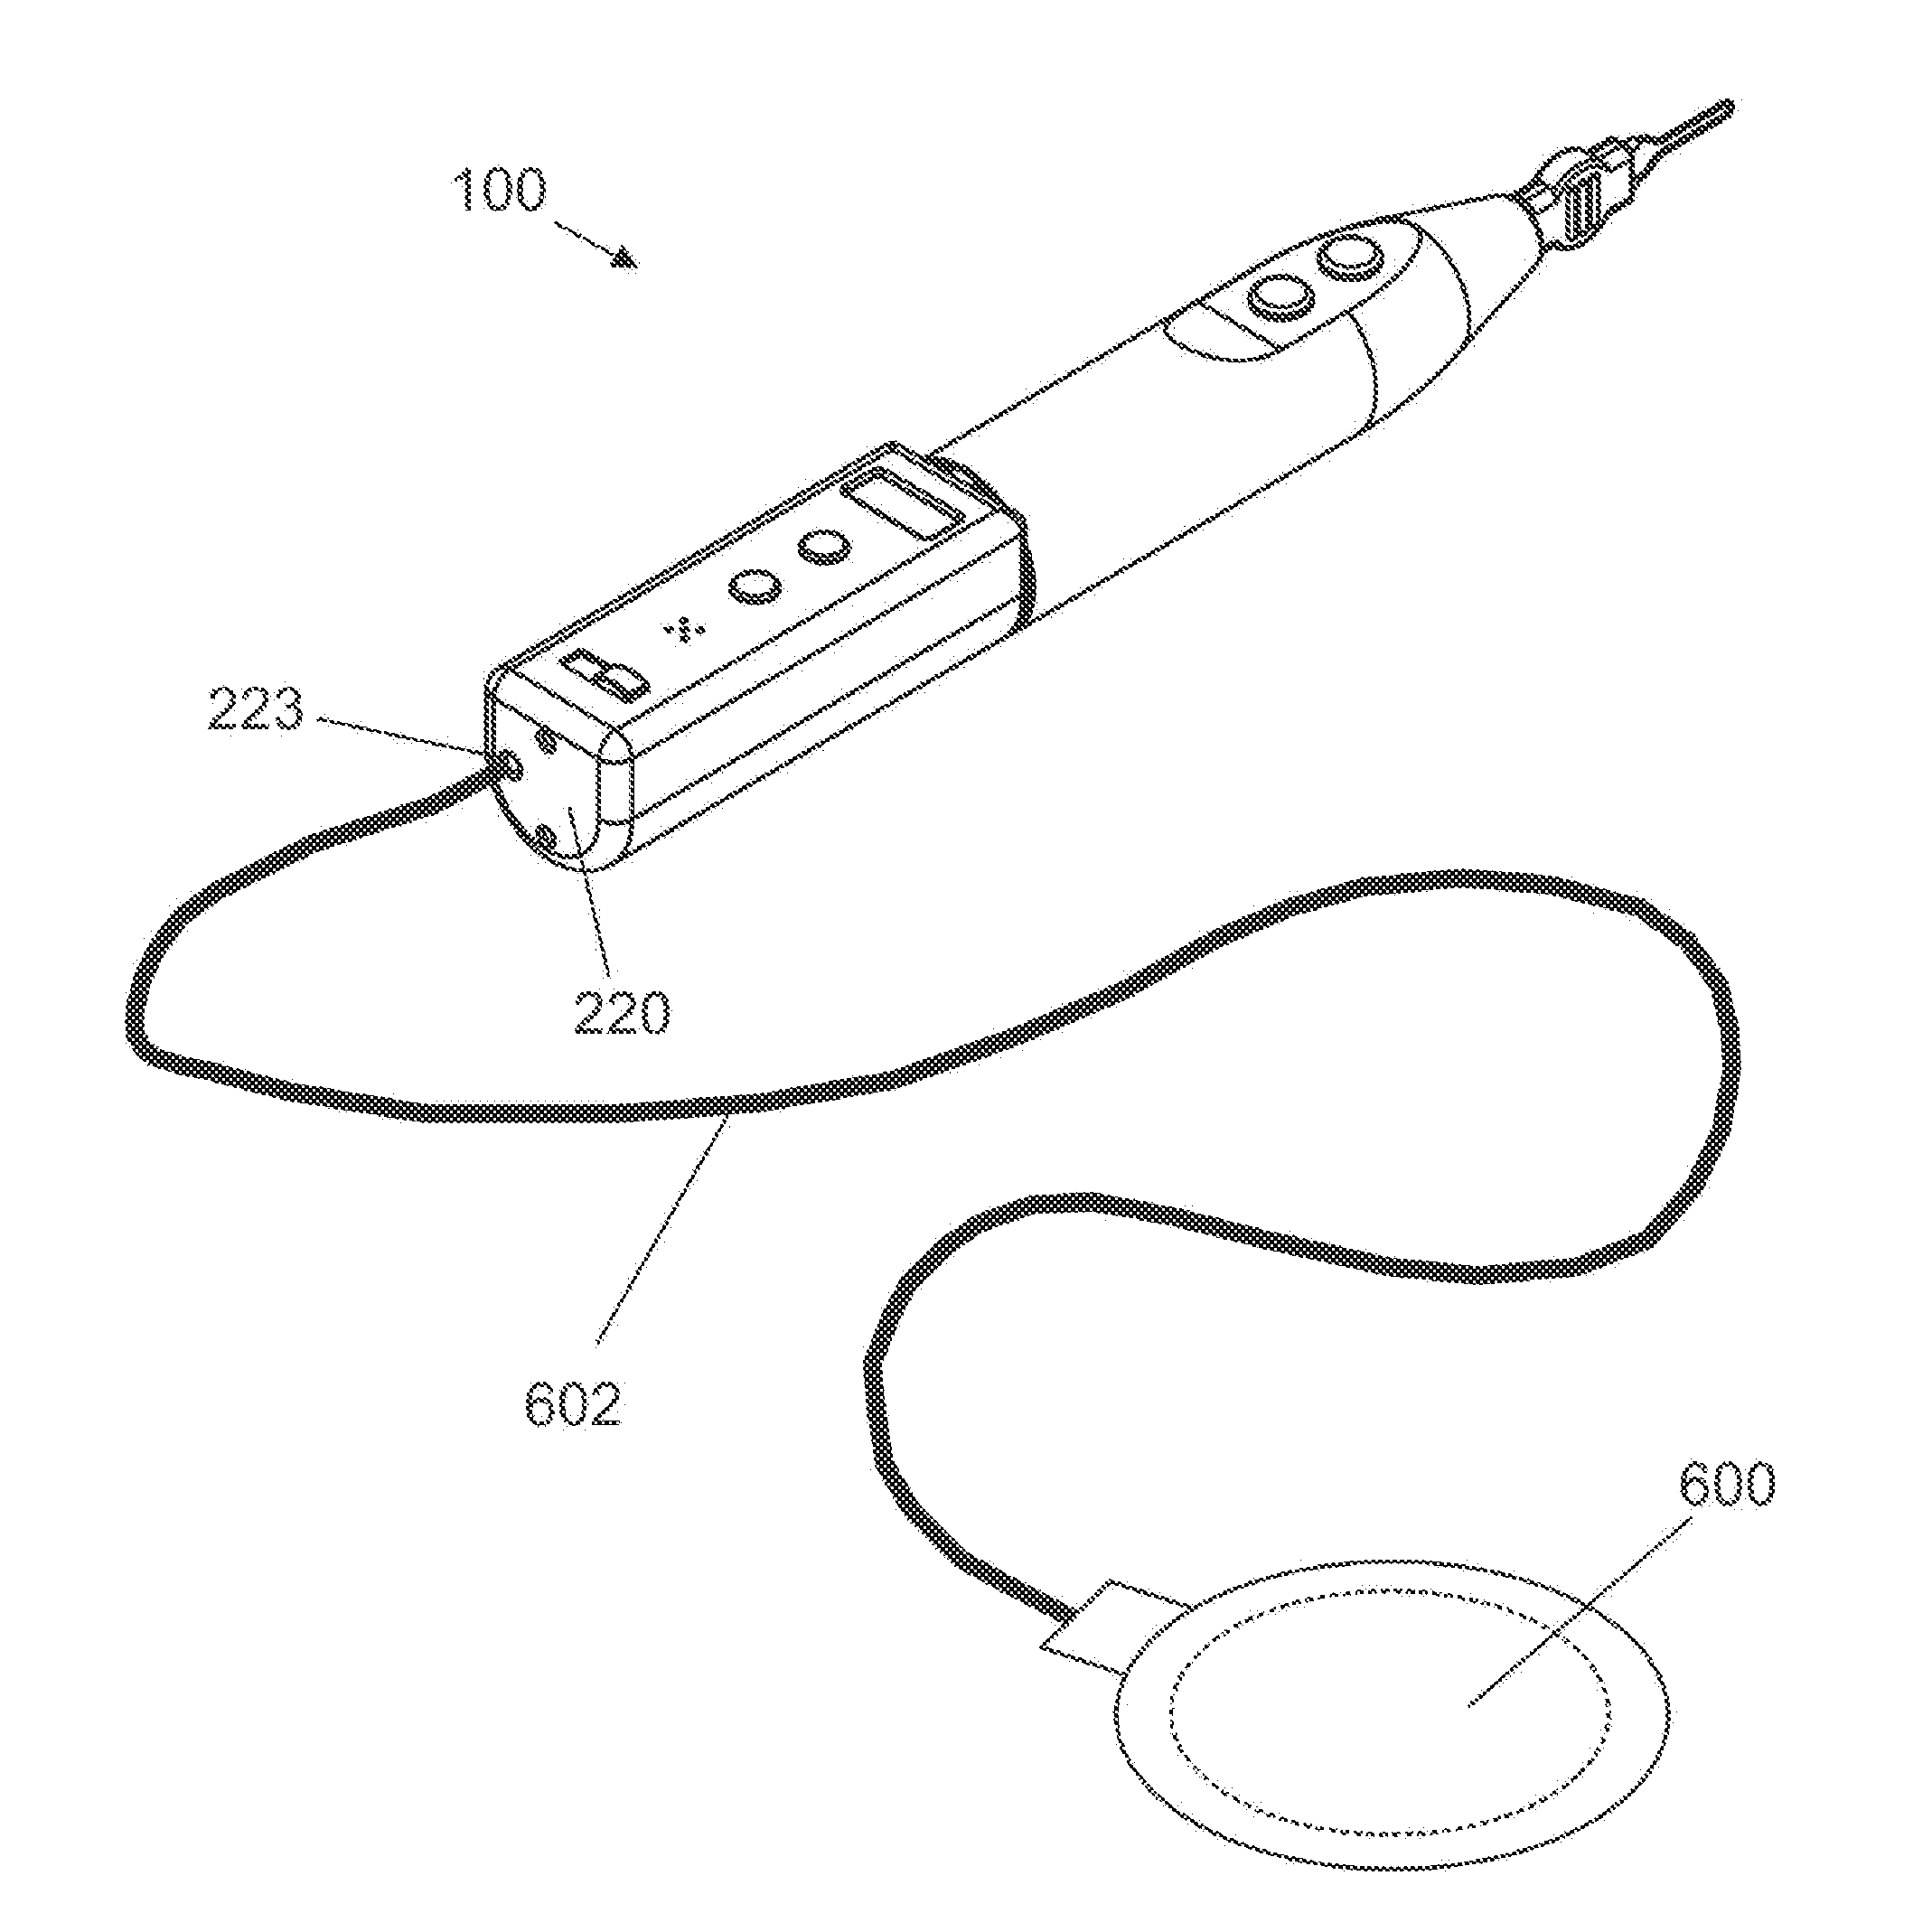 Portable electrosurgical instruments and method of using same